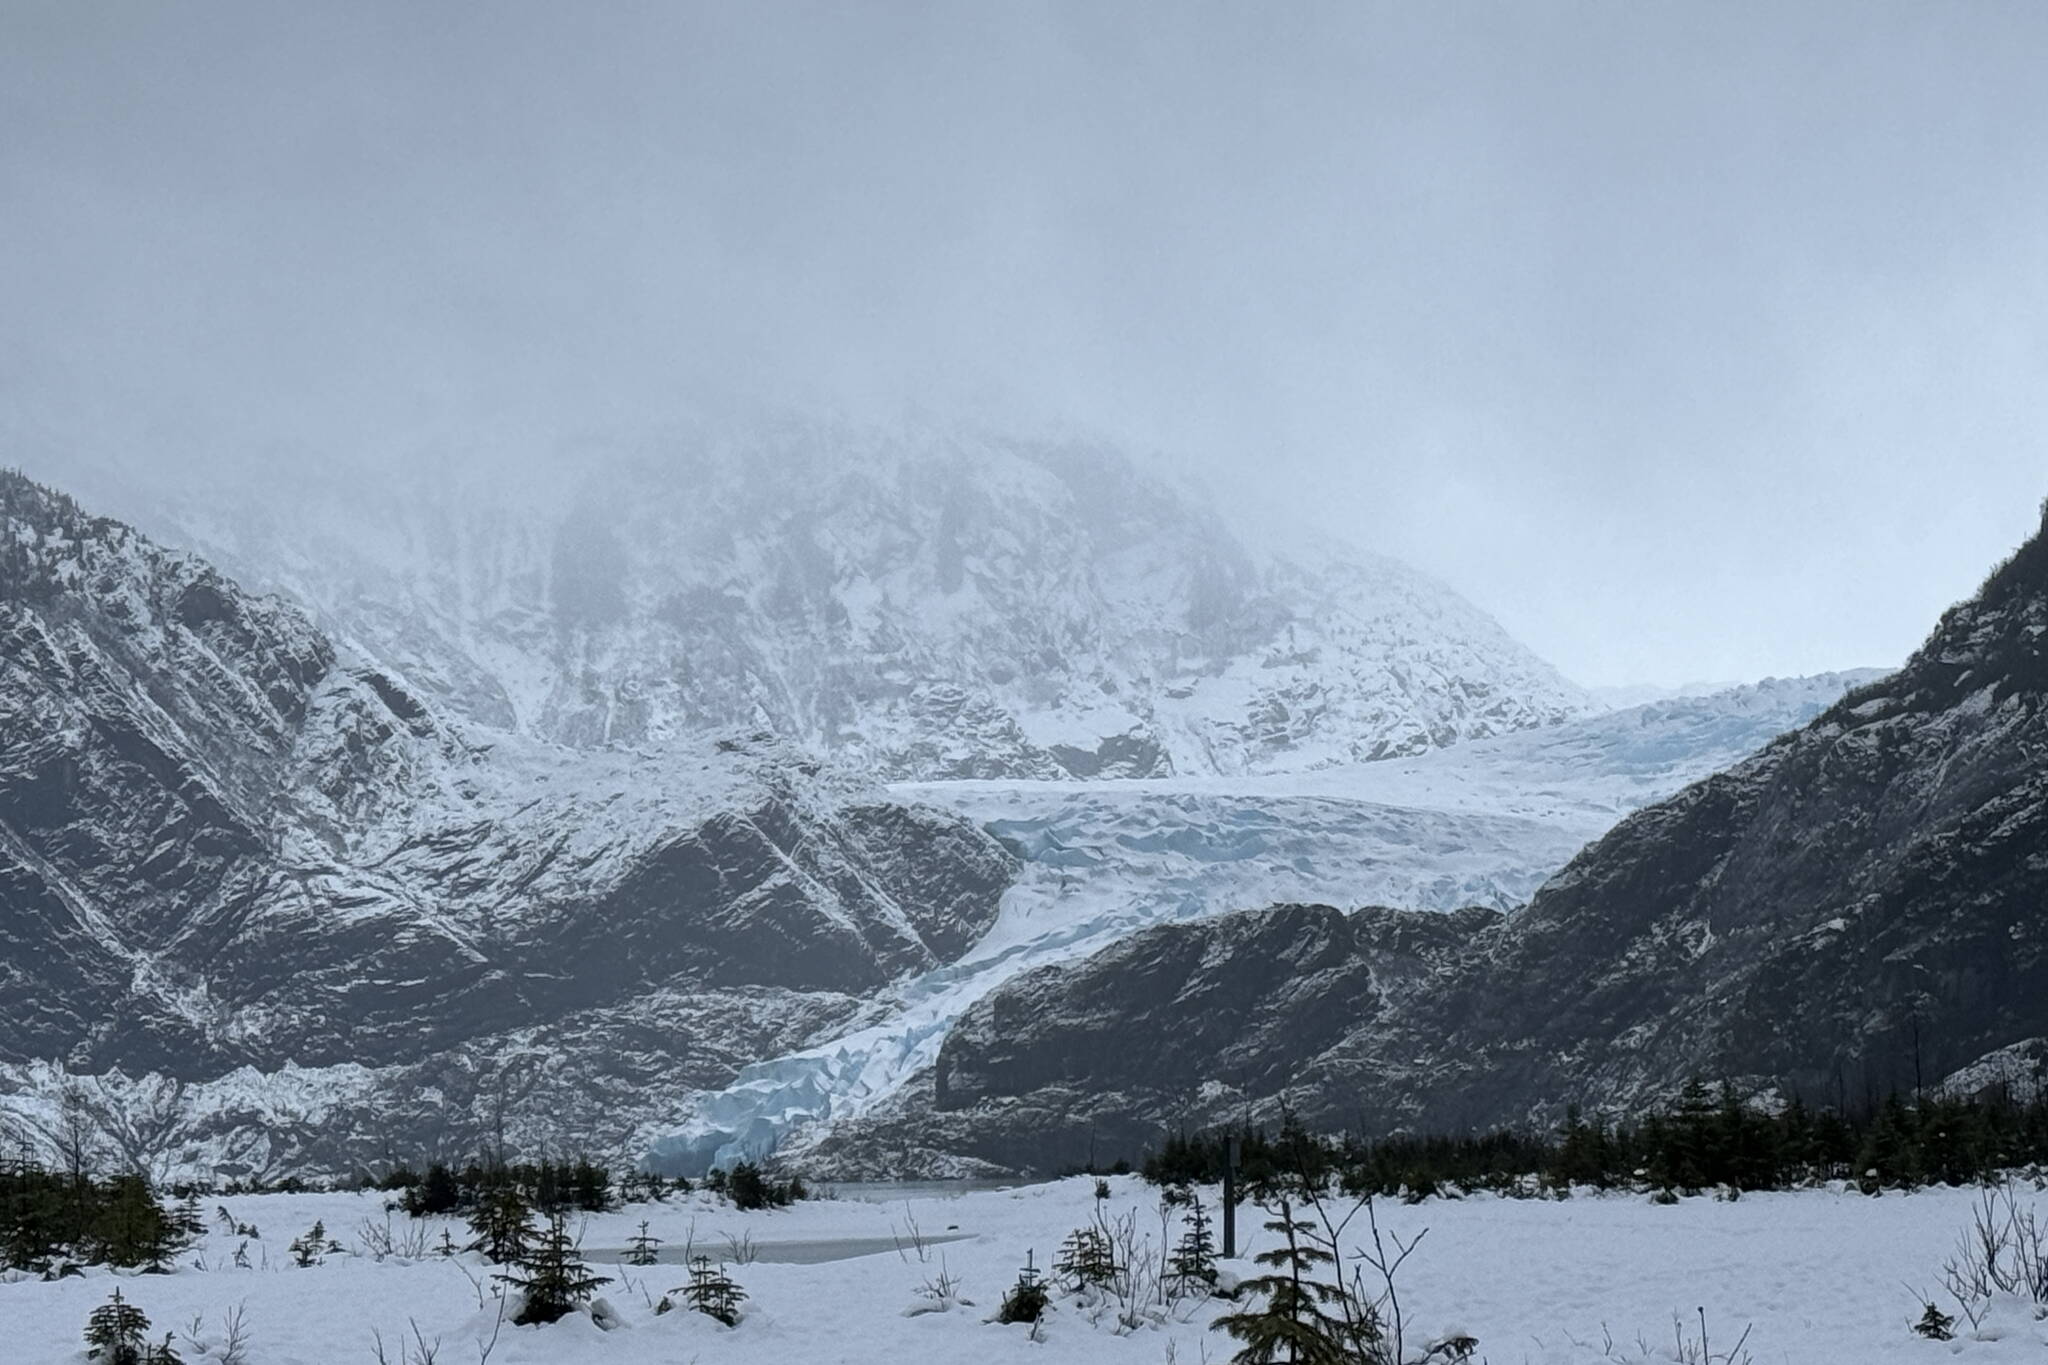 A wide view of the Mendenhall Glacier along the Nugget Falls Trail on Dec. 24. (Photo by Deana Barajas)